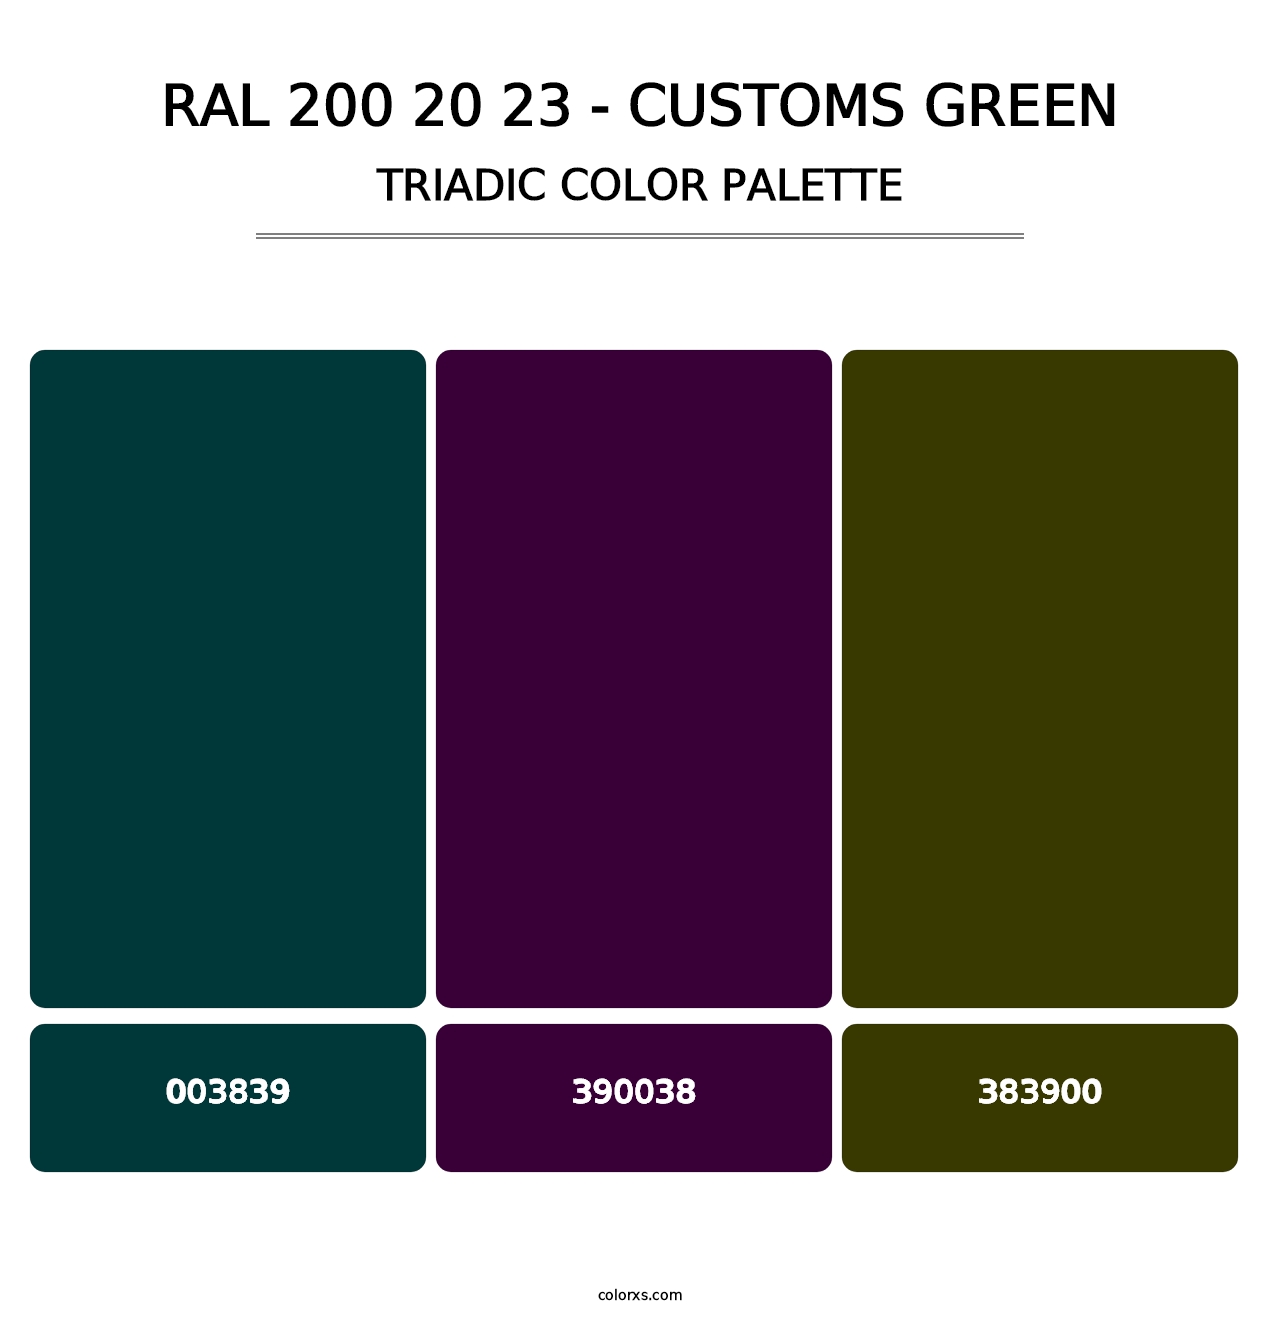 RAL 200 20 23 - Customs Green - Triadic Color Palette